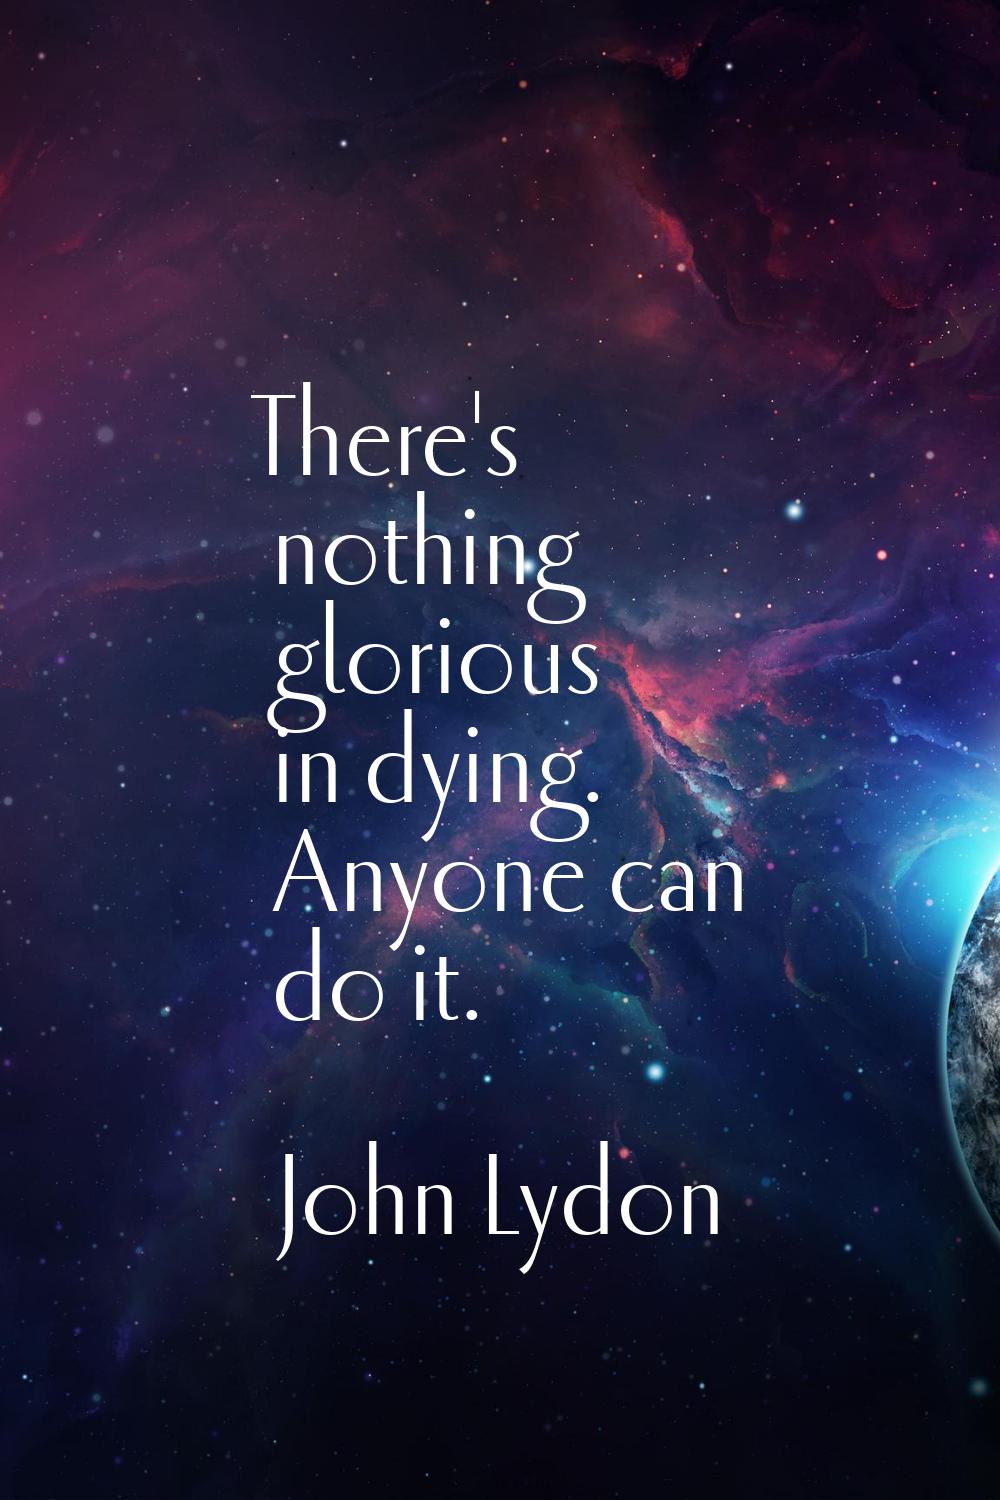 There's nothing glorious in dying. Anyone can do it.